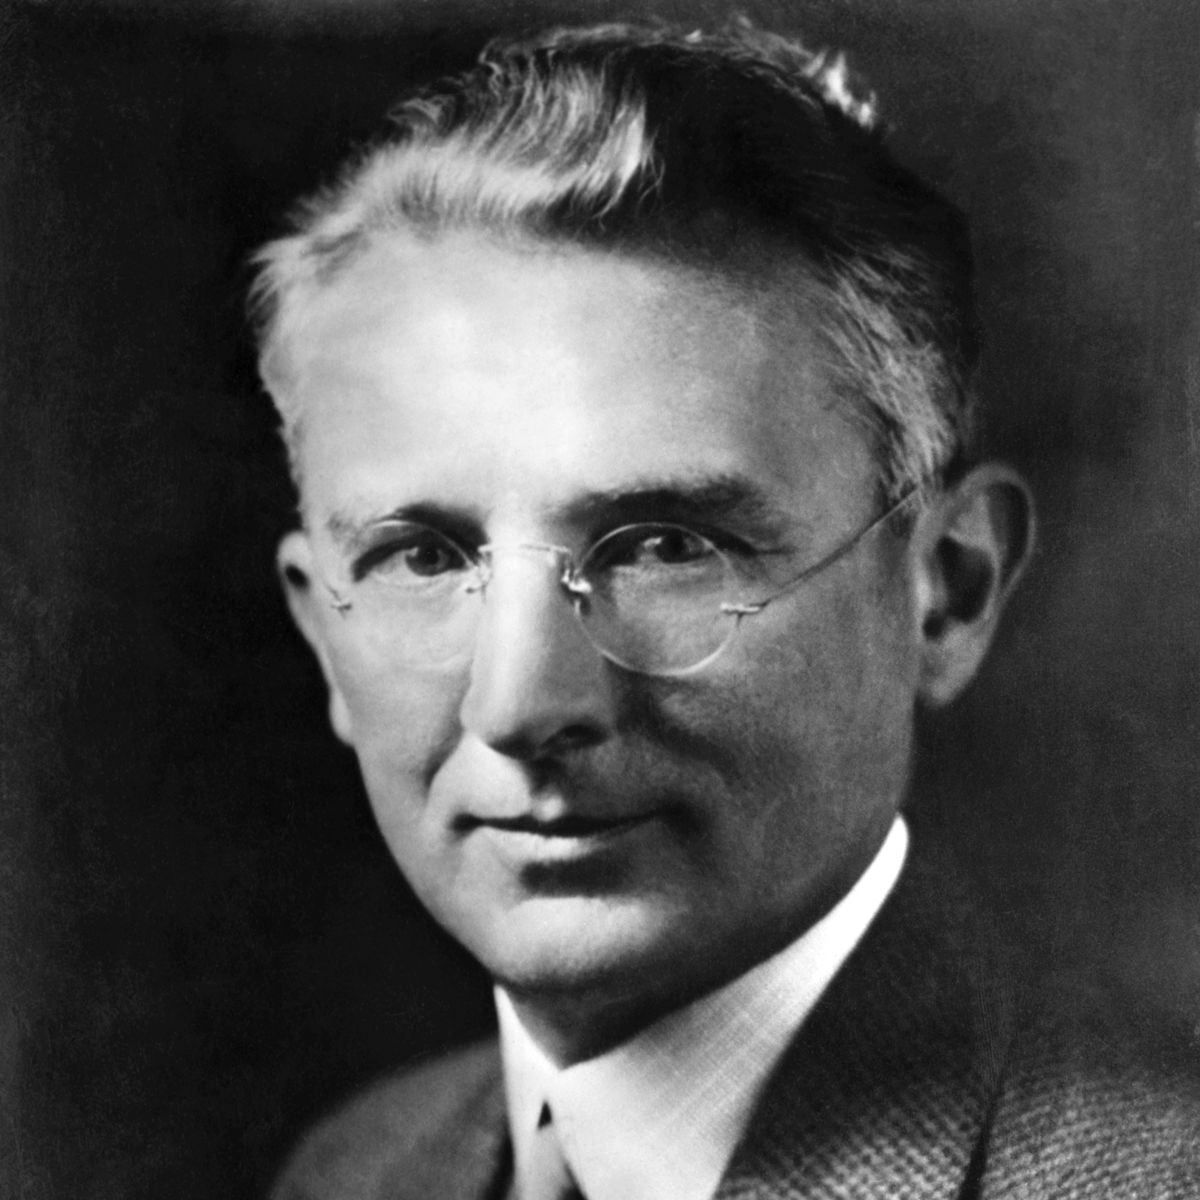 Writer and Lecturer Dale Carnegie(Original Caption) Dale Carnegie, author of "How to Win Friends and Influence People." Head and shoulders portrait.